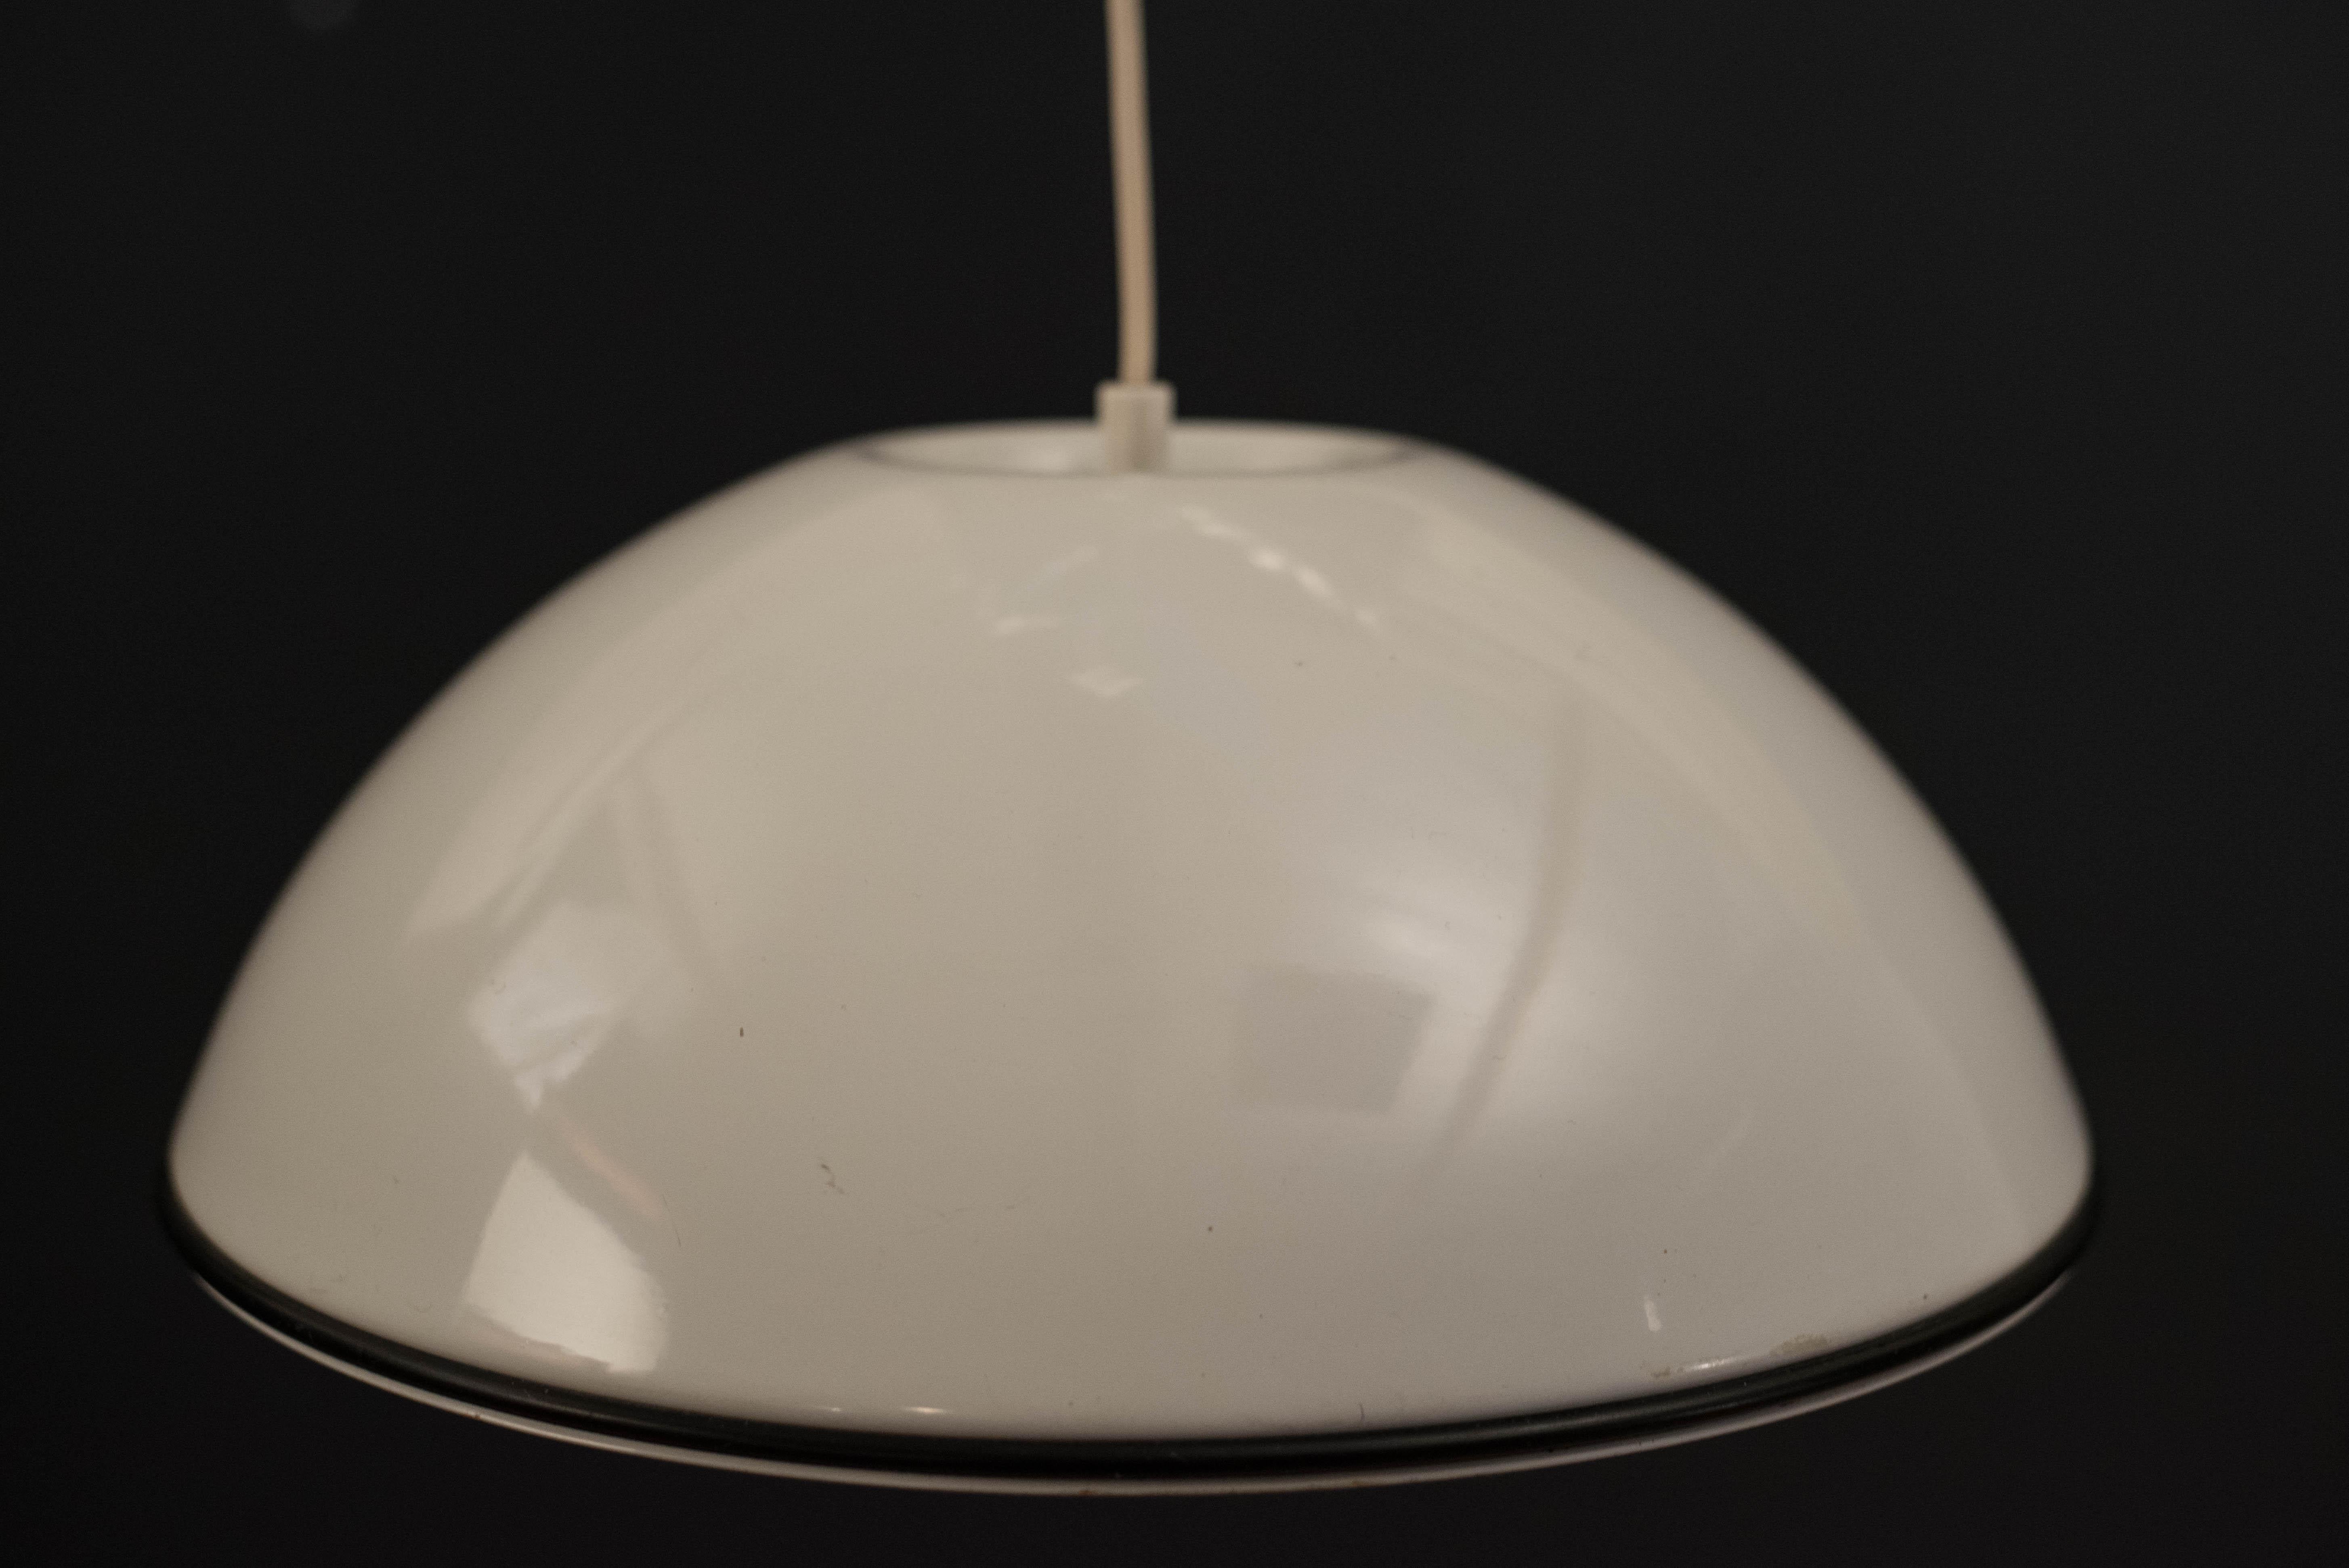 Vintage Relemme hanging pendant lamp designed by Achille and Pier Giacomo Castiglioni for Flos. This piece has a white enamel finish with black rubber trim. Counterbalance pulley is adjustable to your desired height.